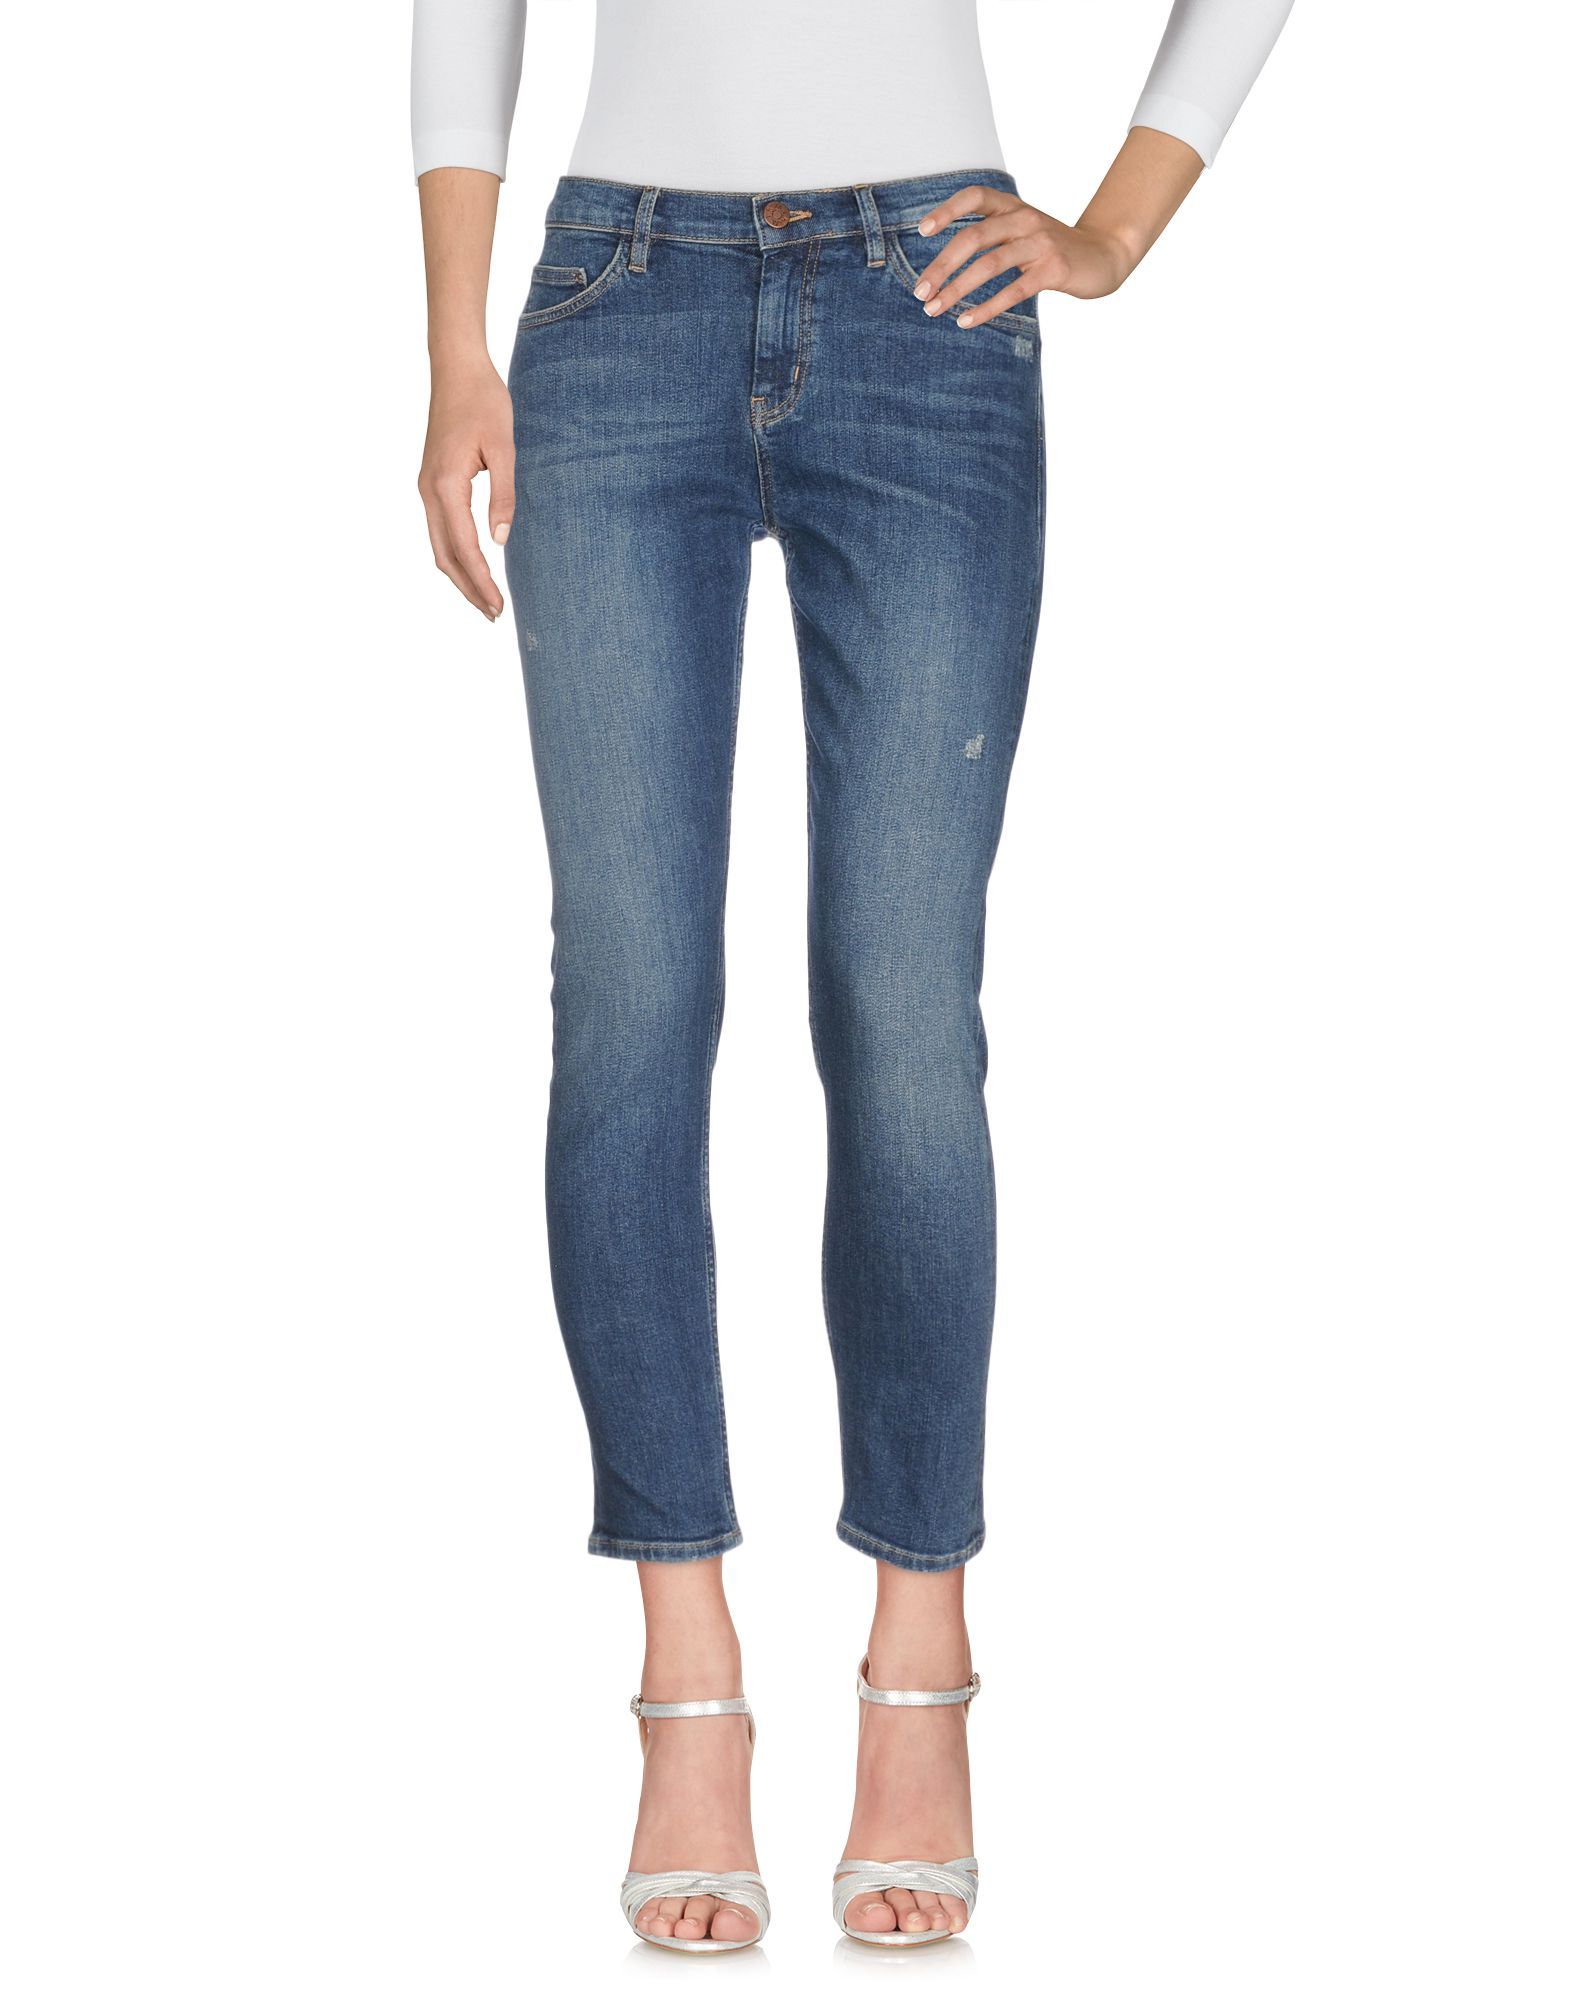 M.I.H JEANS Jeans | YOOX (US)